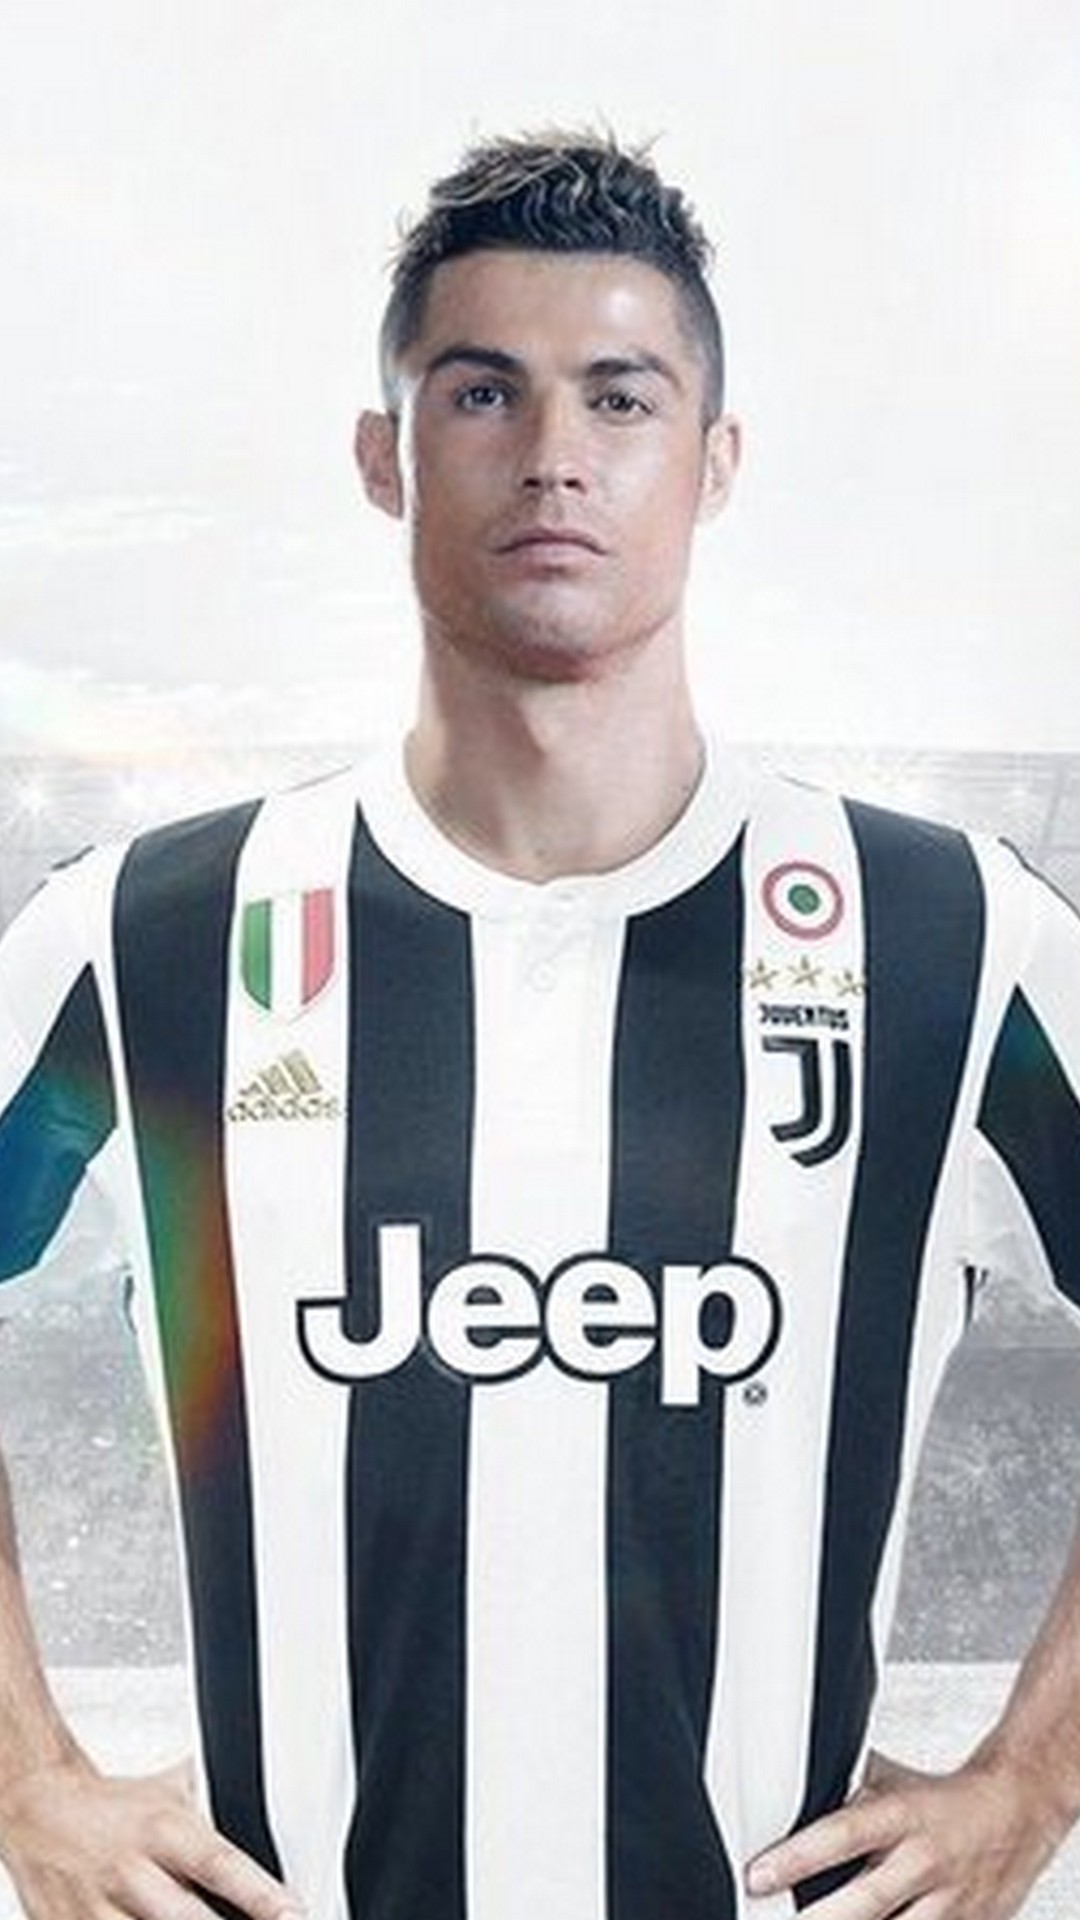 Wallpaper C Ronaldo Juventus iPhone with image resolution 1080x1920 pixel. You can make this wallpaper for your iPhone 5, 6, 7, 8, X backgrounds, Mobile Screensaver, or iPad Lock Screen